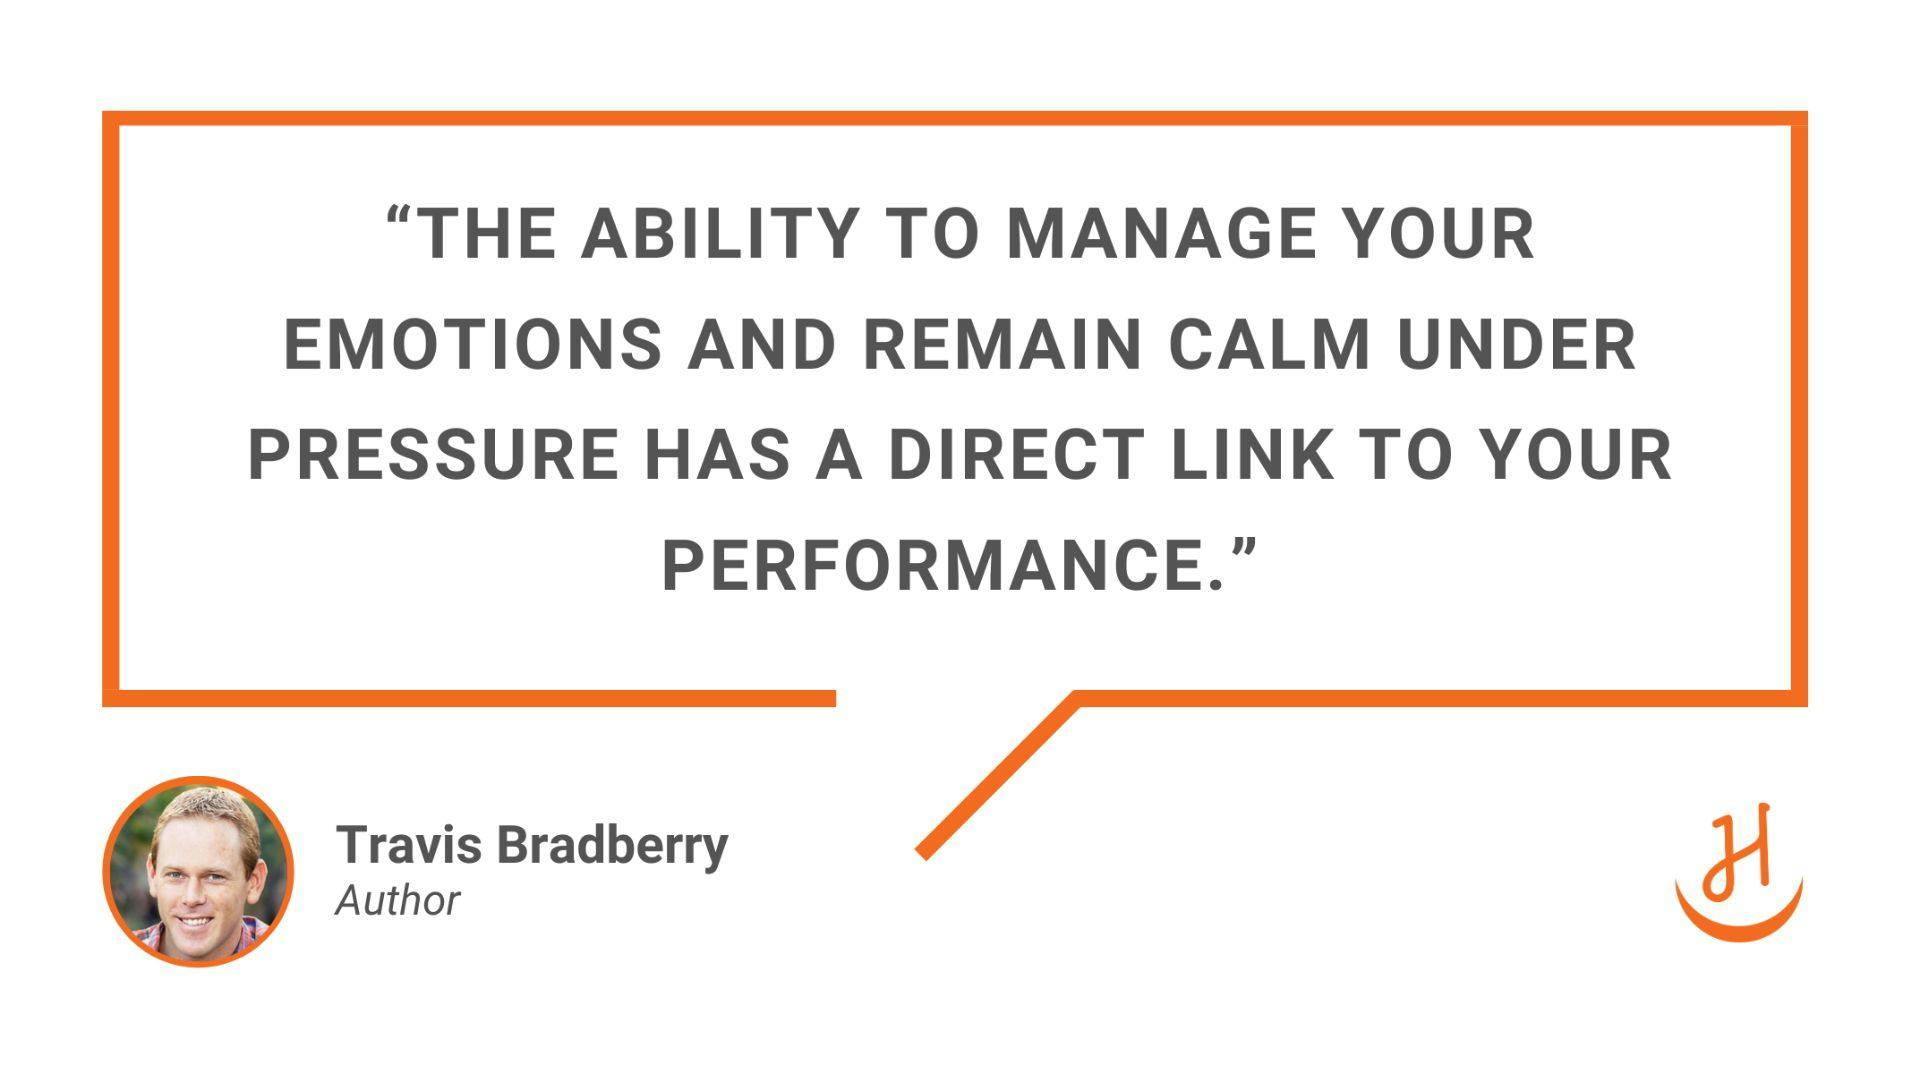 "The ability to manage your emotions and remain calm under pressure has a direct link to your performance." Quote by Terry Bradberry, Author